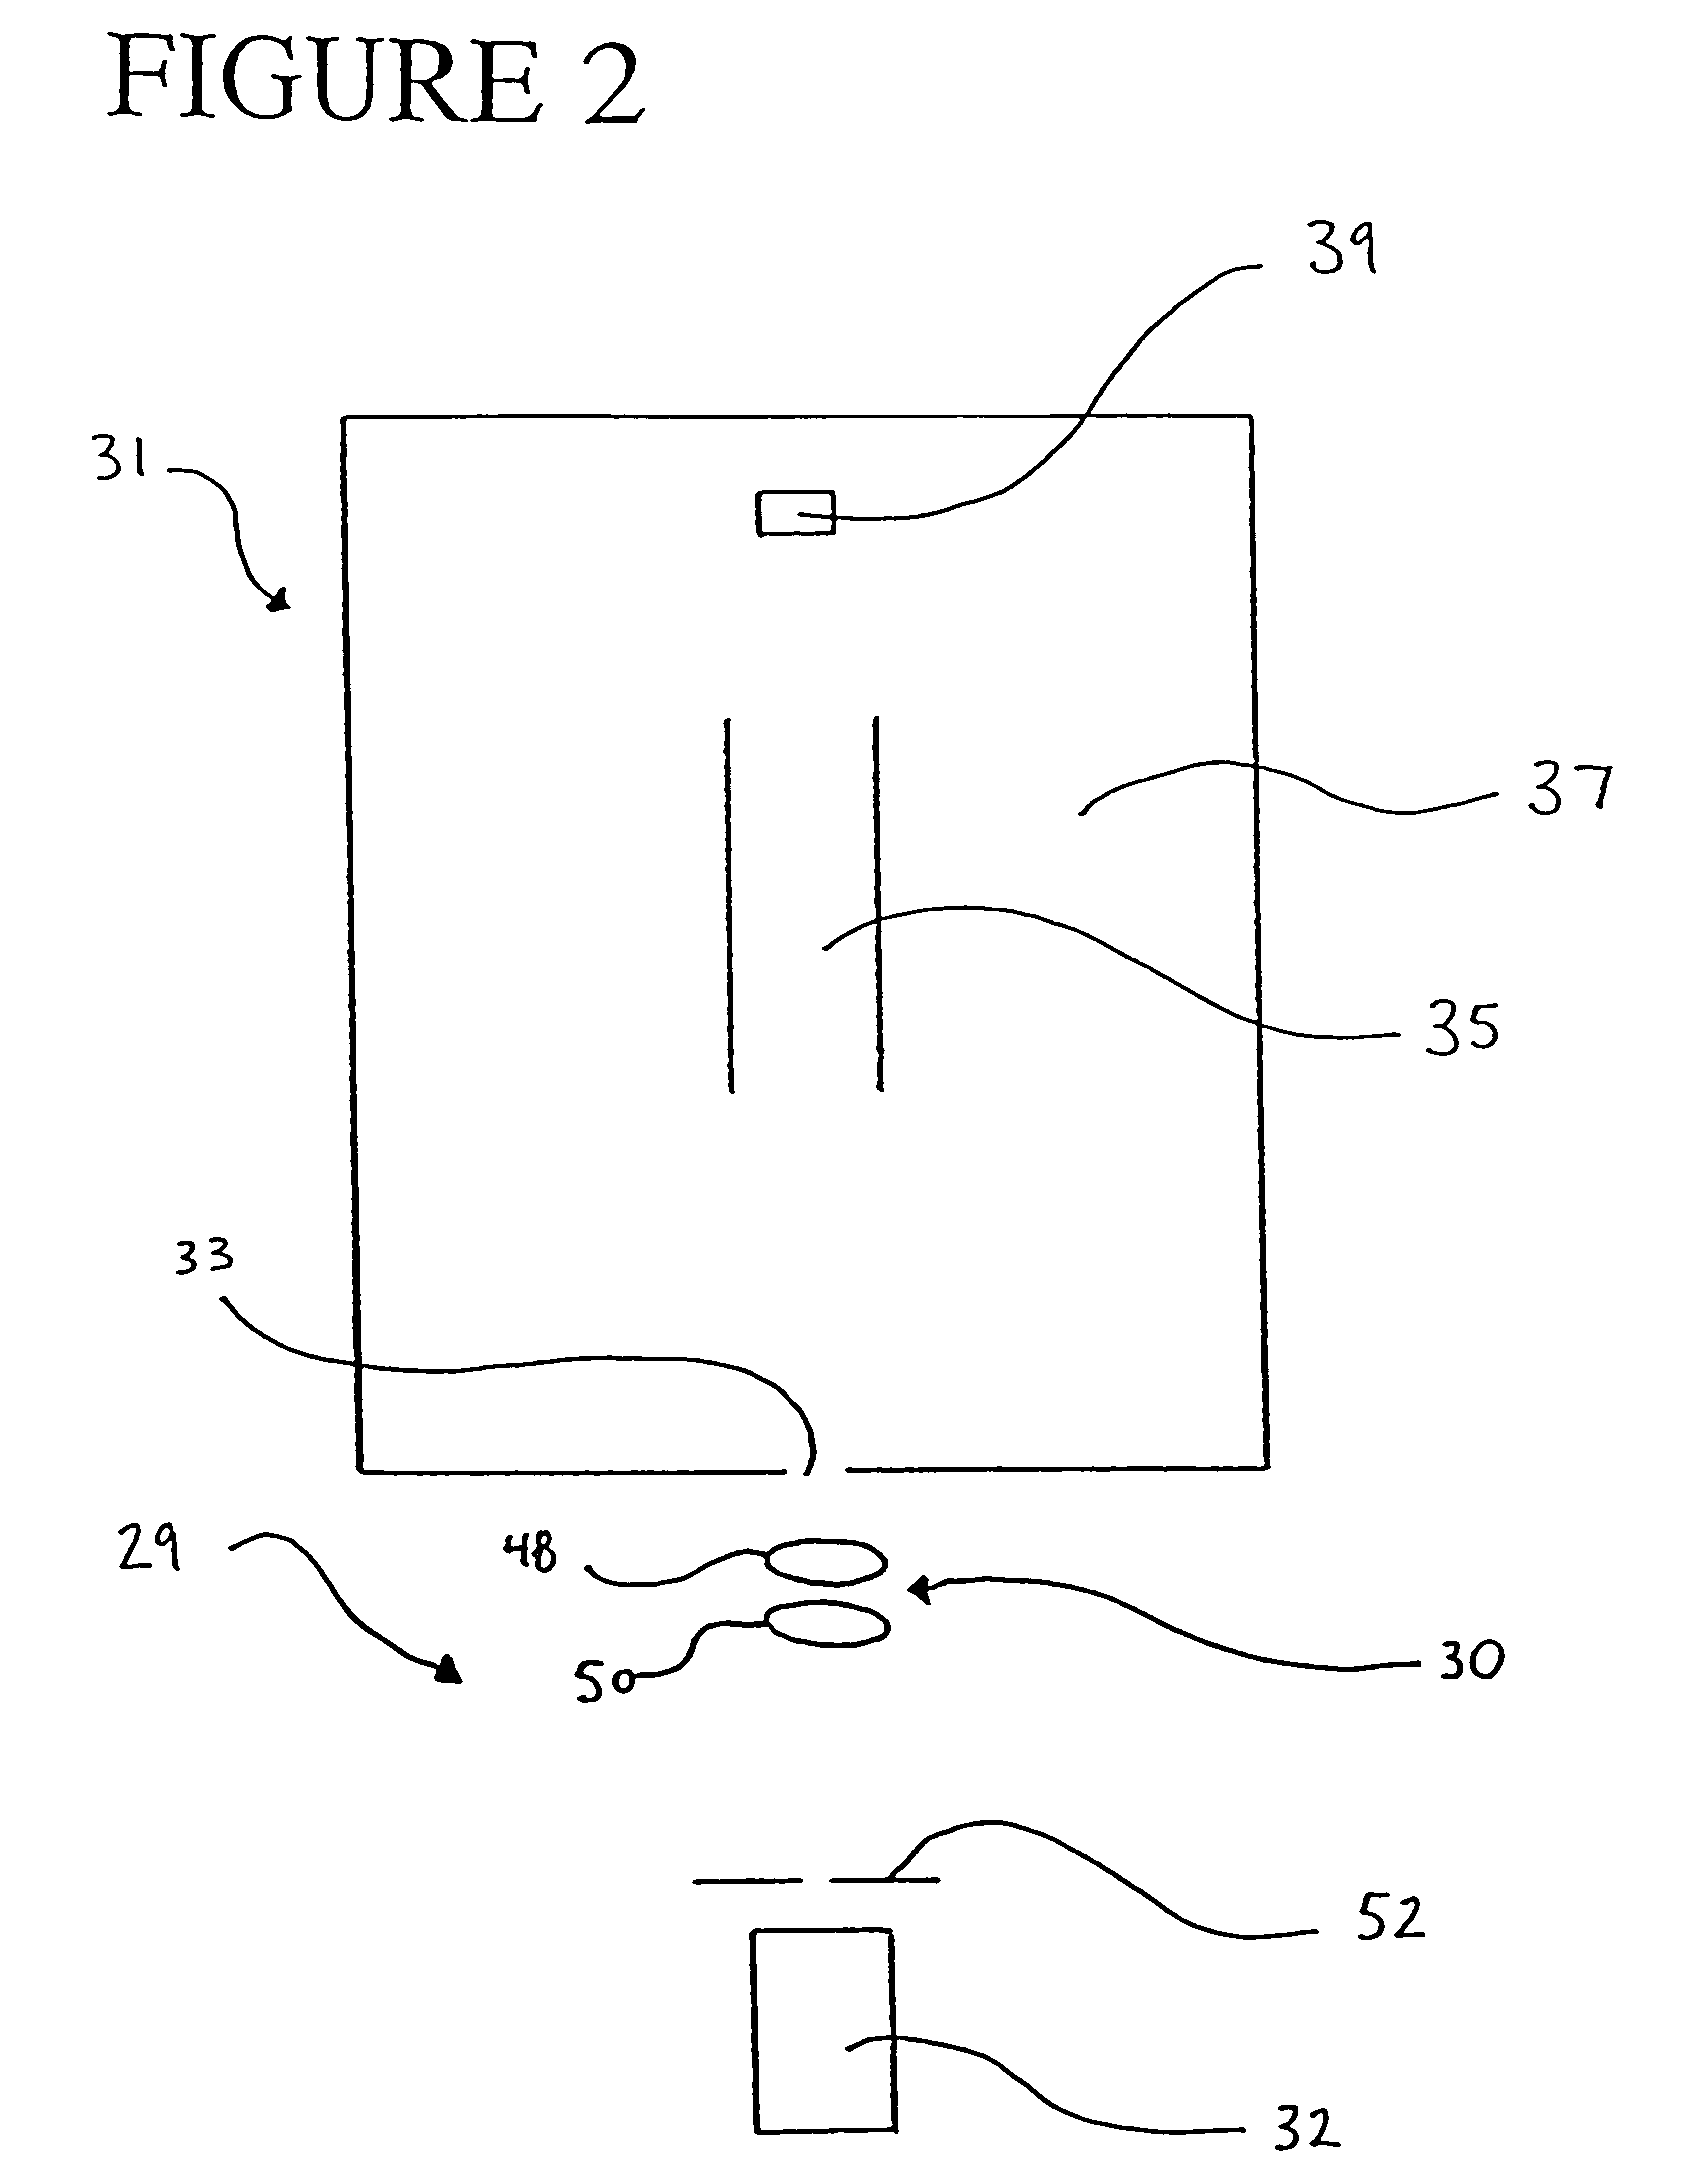 Method and apparatus for producing a discrete droplet for subsequent analysis or manipulation